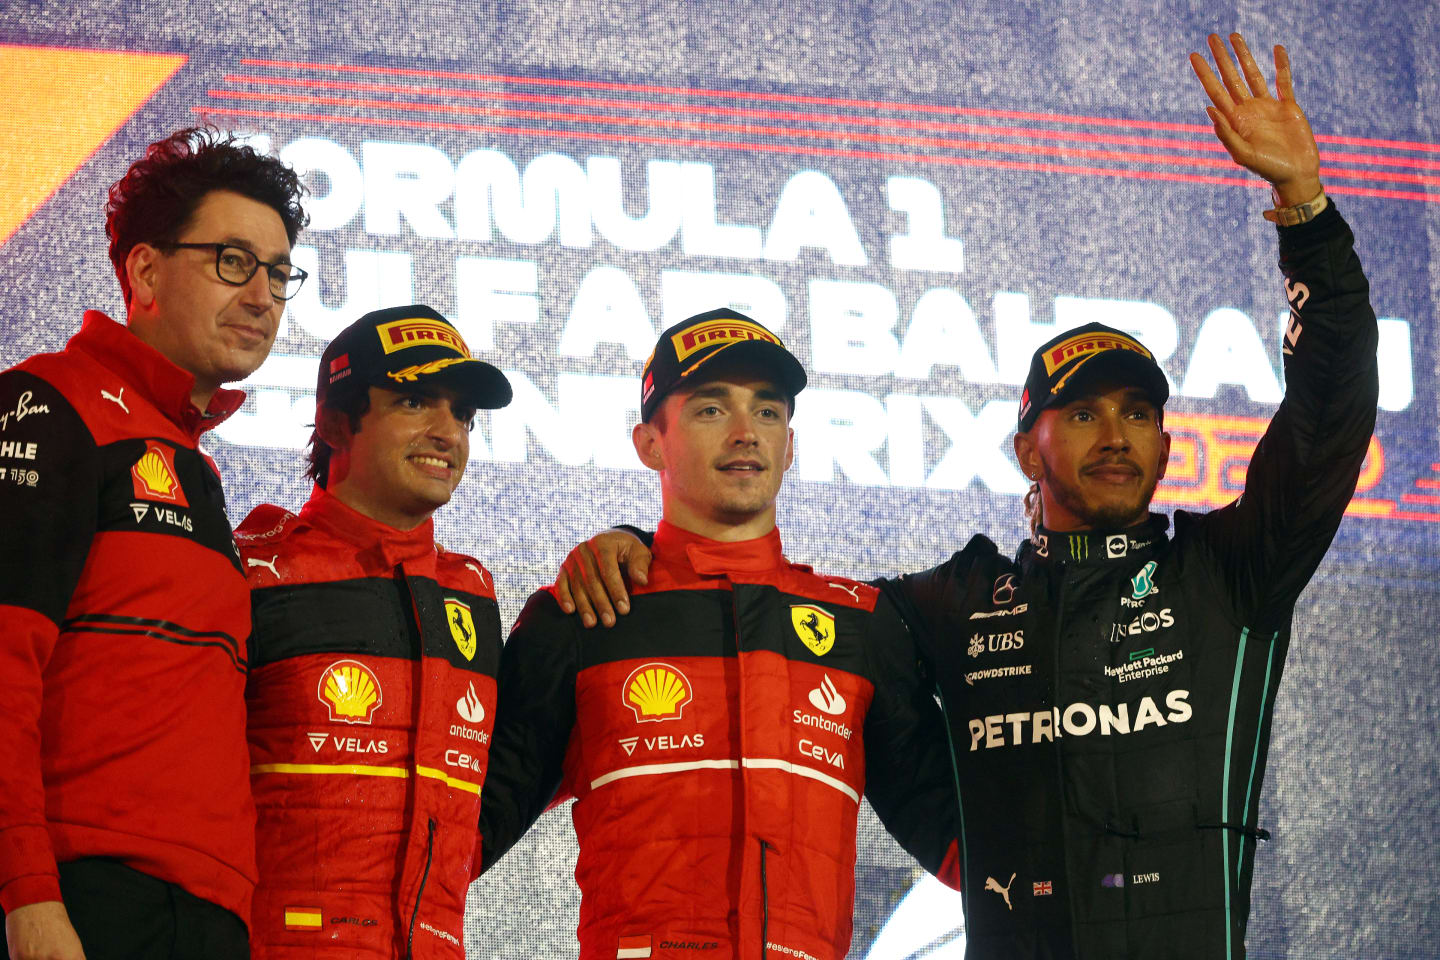 BAHRAIN, BAHRAIN - MARCH 20: Race winner Charles Leclerc of Monaco and Ferrari (second from right), Second placed Carlos Sainz of Spain and Ferrari (second from left) Third placed Lewis Hamilton of Great Britain and Mercedes (R) and Scuderia Ferrari Team Principal Mattia Binotto (L) celebrate on the podium during the F1 Grand Prix of Bahrain at Bahrain International Circuit on March 20, 2022 in Bahrain, Bahrain. (Photo by Clive Rose - Formula 1/Formula 1 via Getty Images)